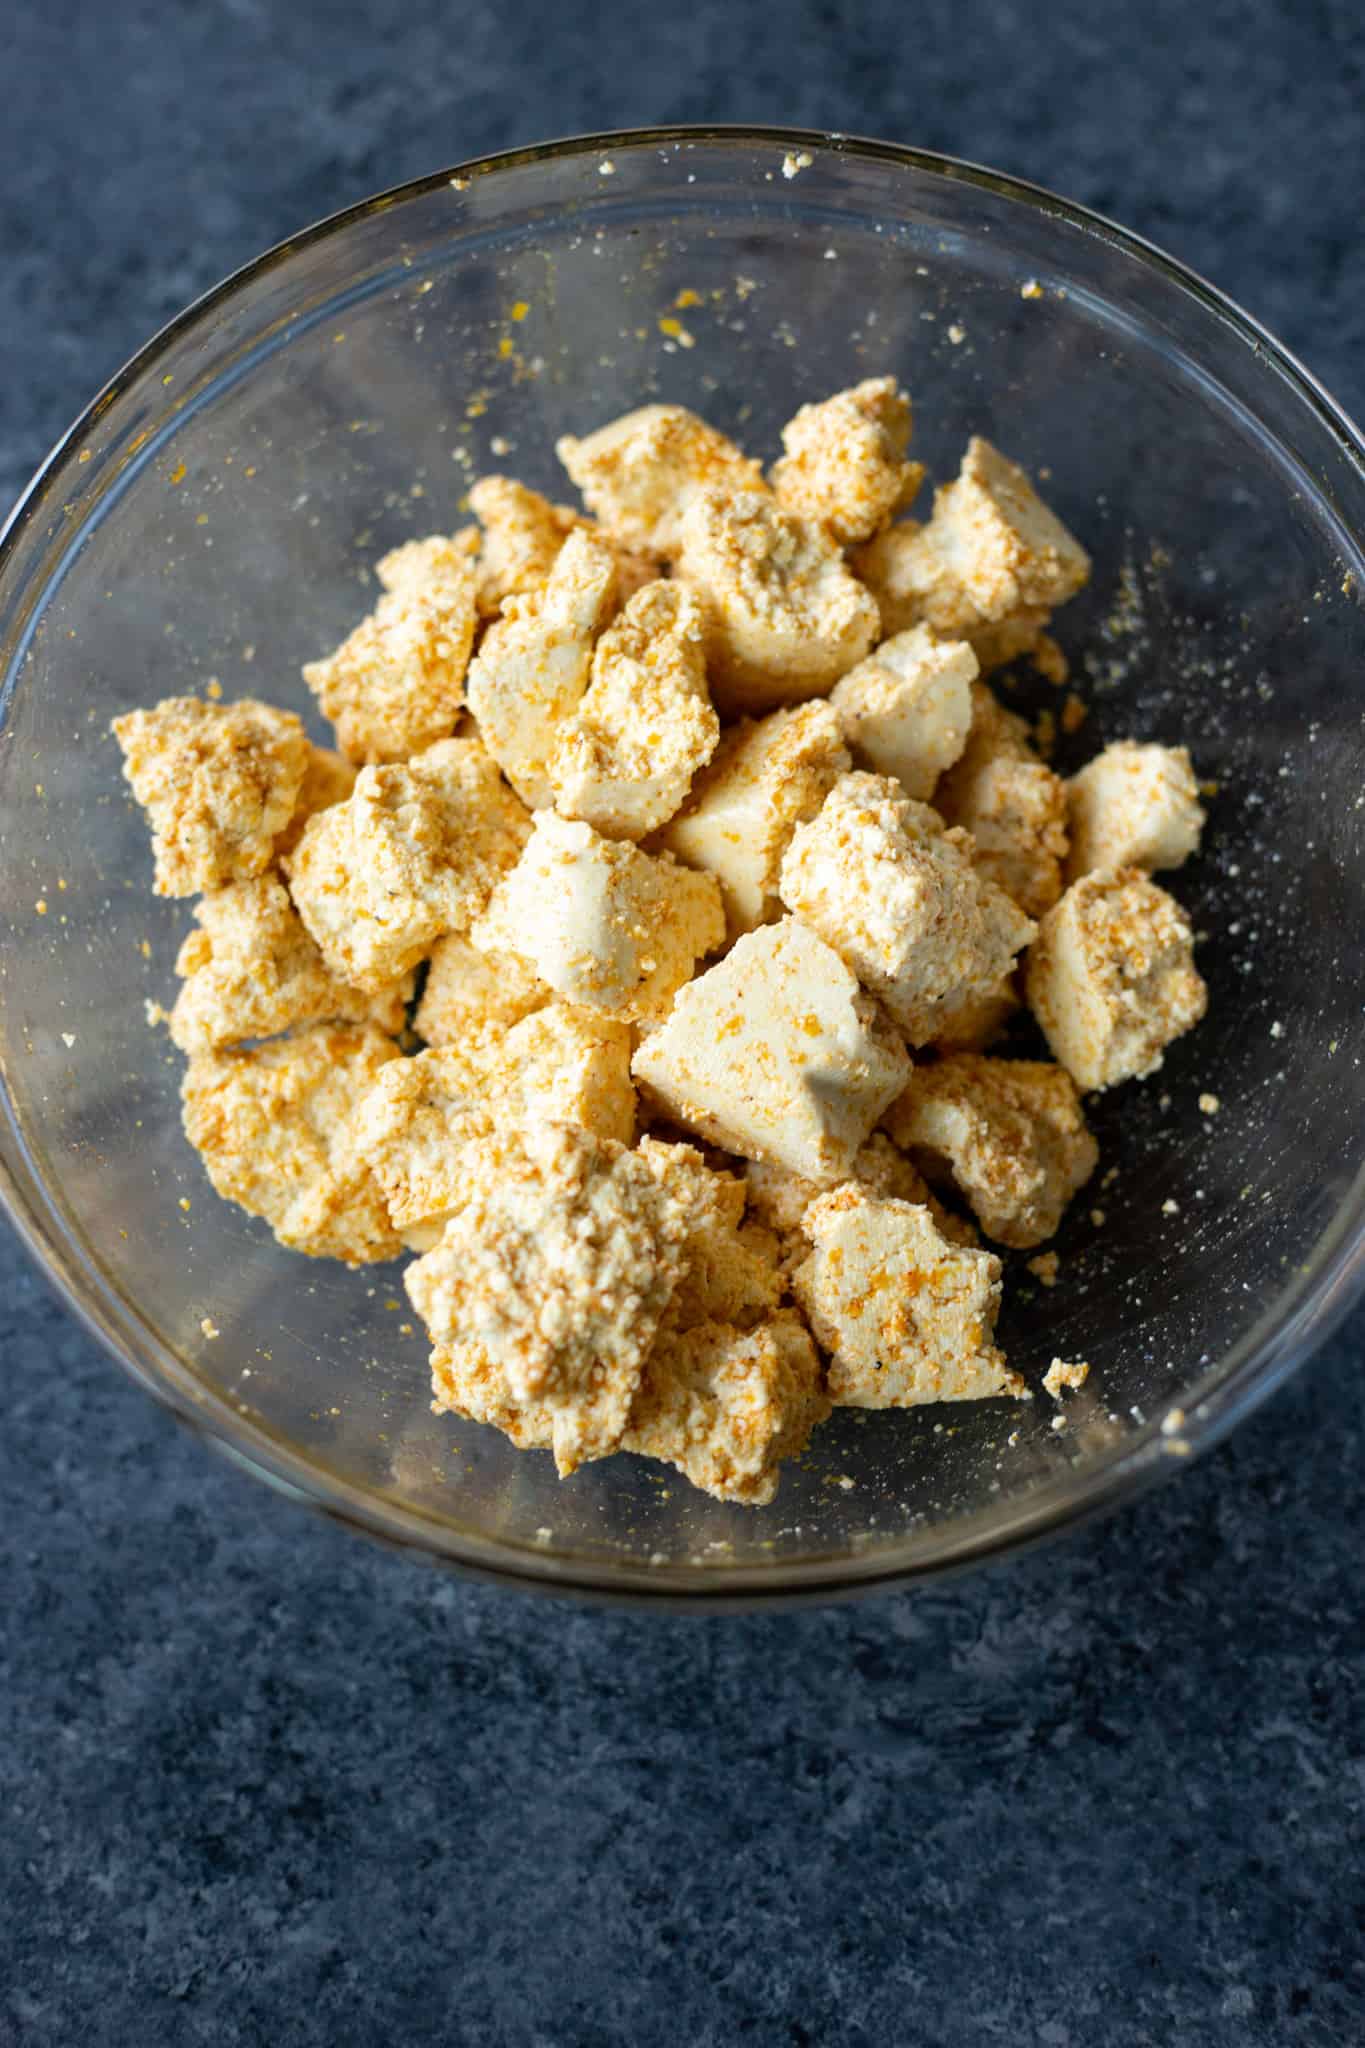 marinaded tofu nuggets in a bowl